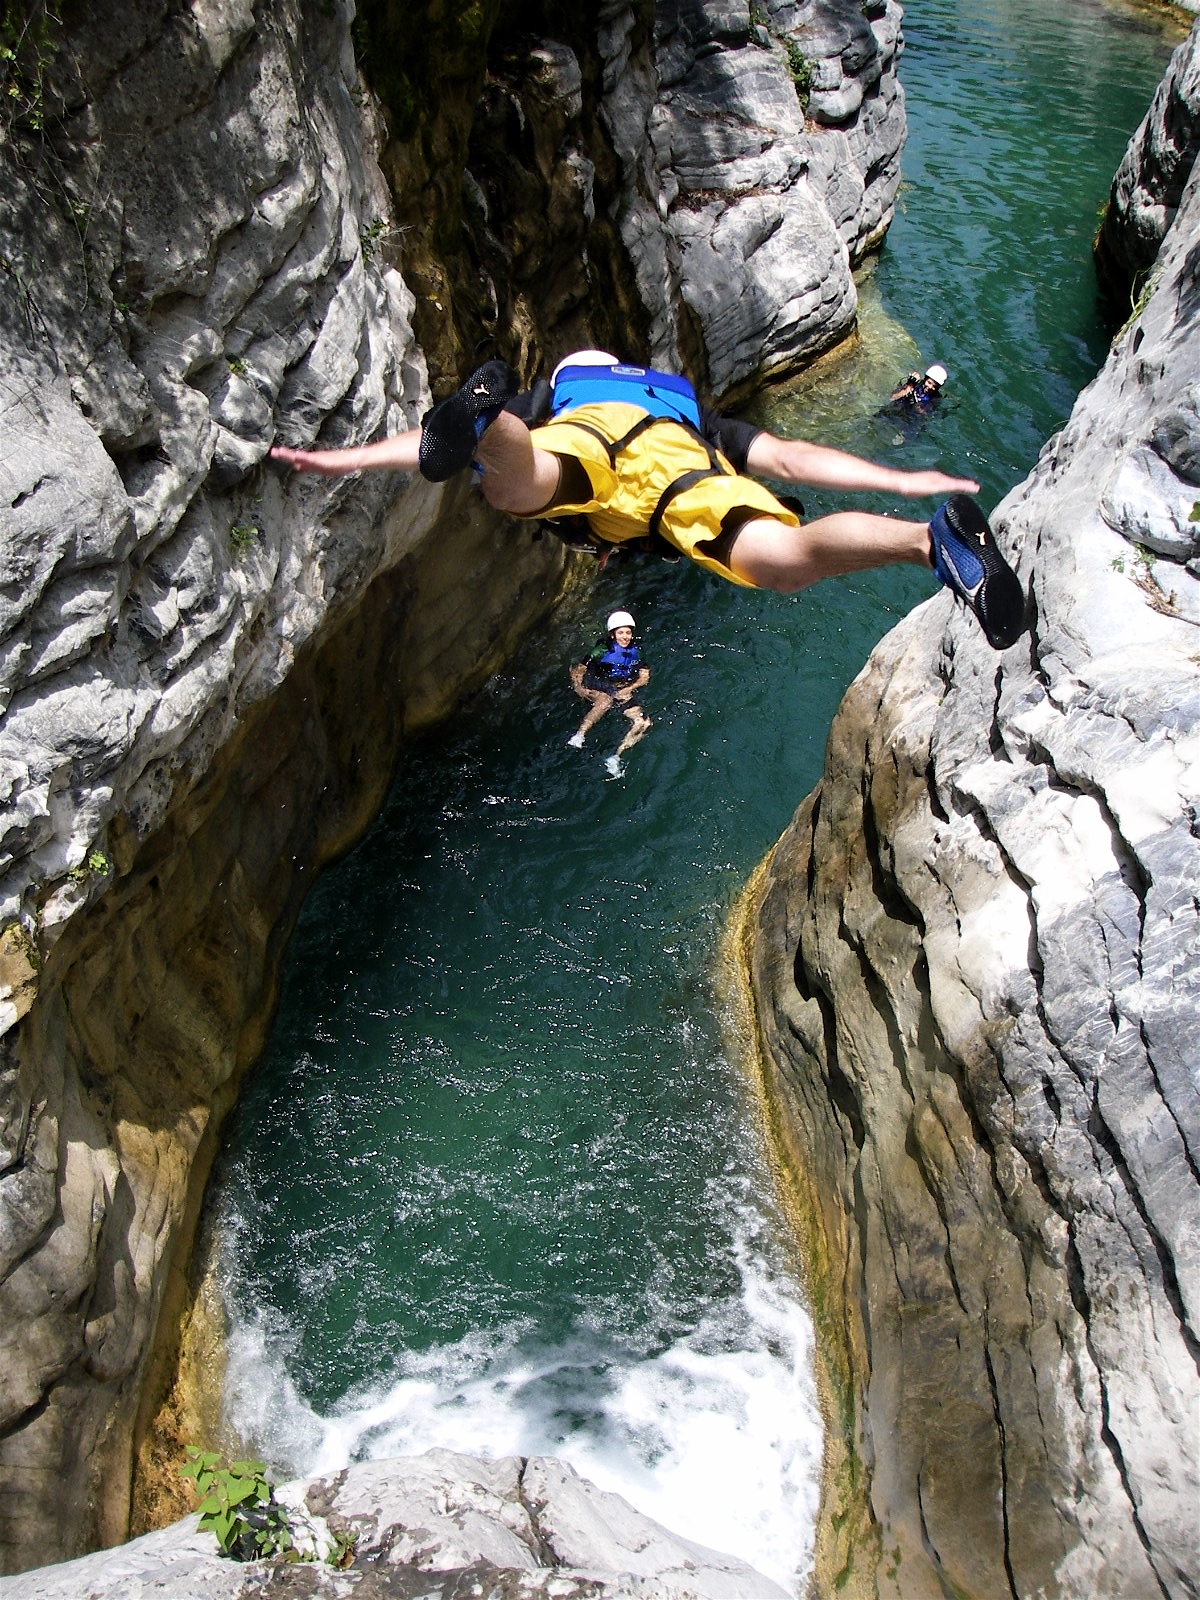 a man standing on his stomach as he rides an upside down raft